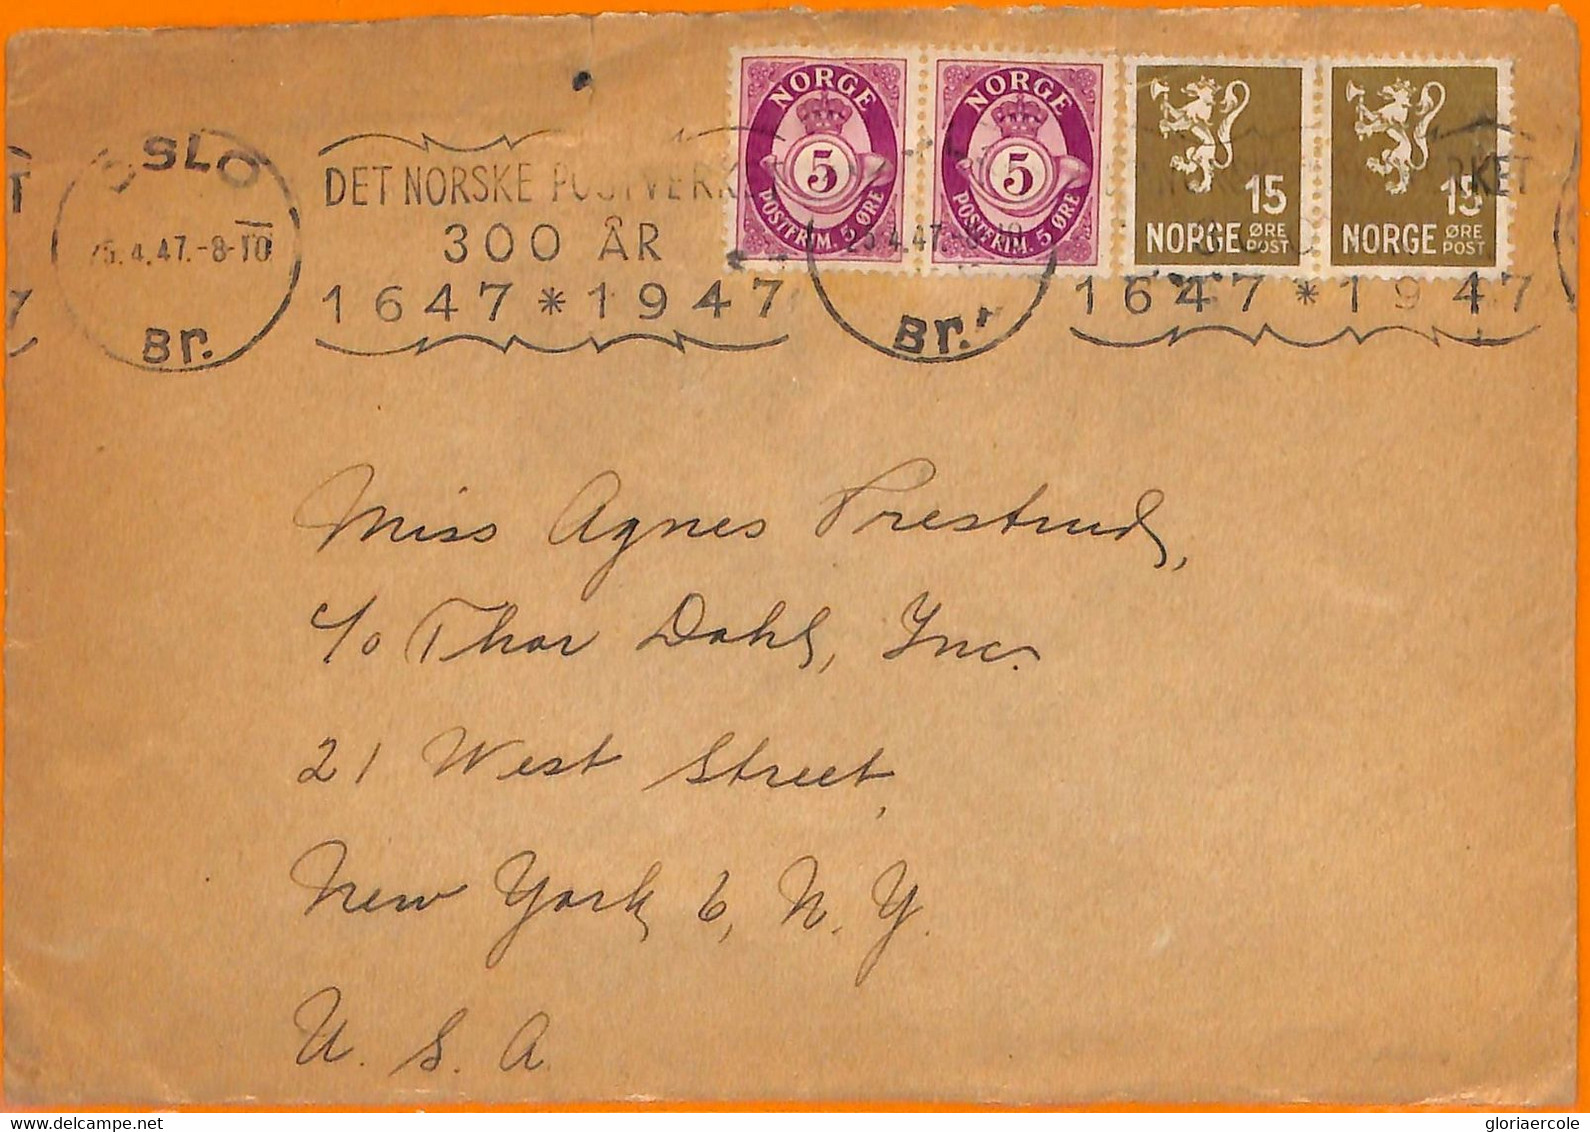 99410 - NORWAY - Postal History -  Cover To The USA 1947 - Storia Postale